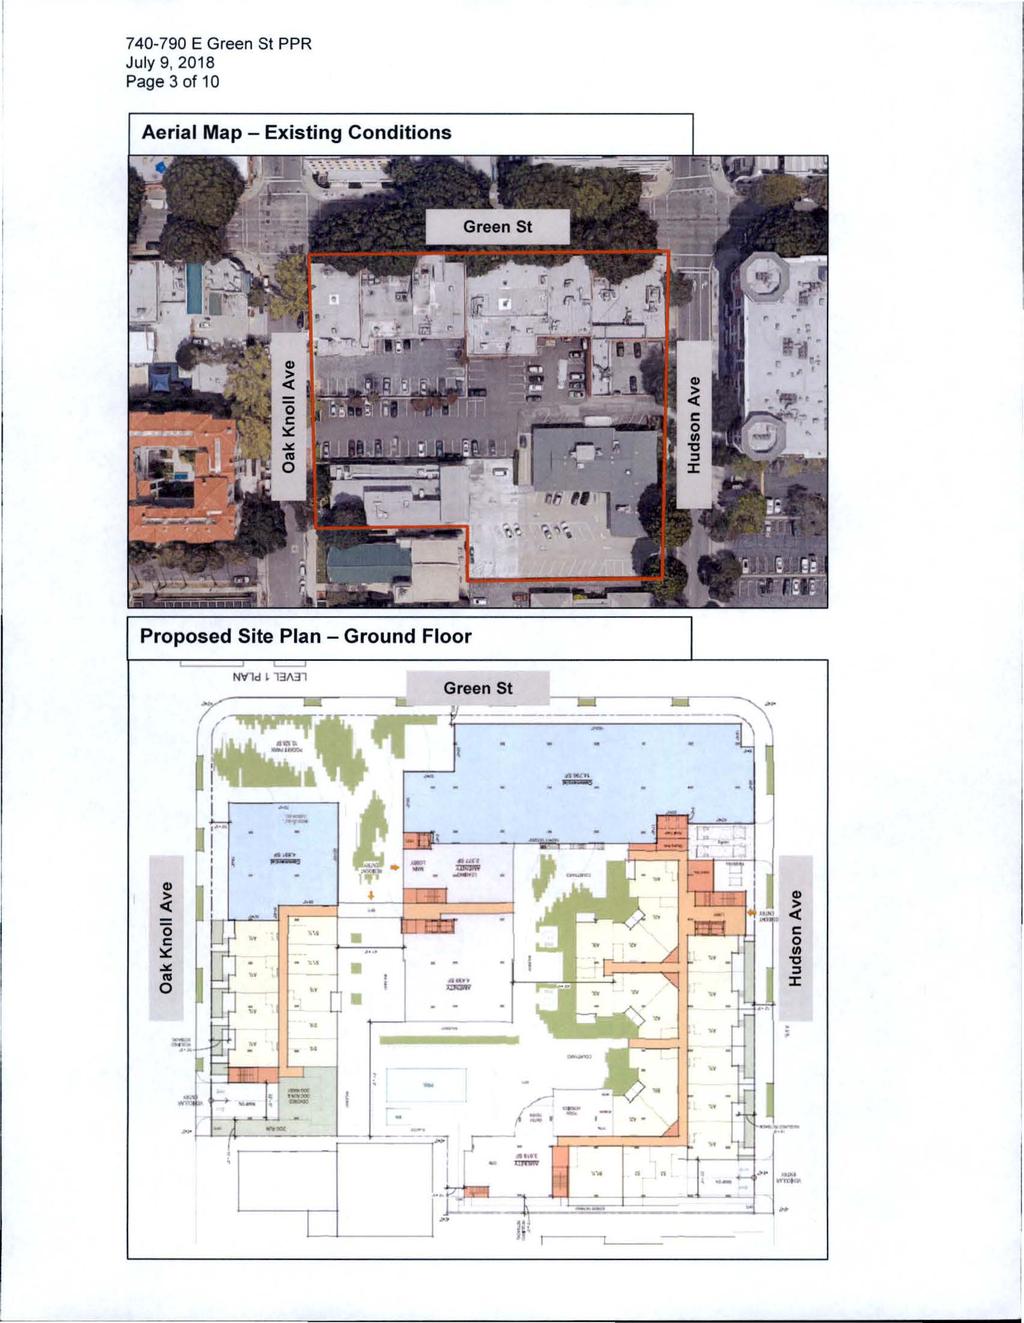 Page 3 of 10 Aerial Map -Existing Conditions